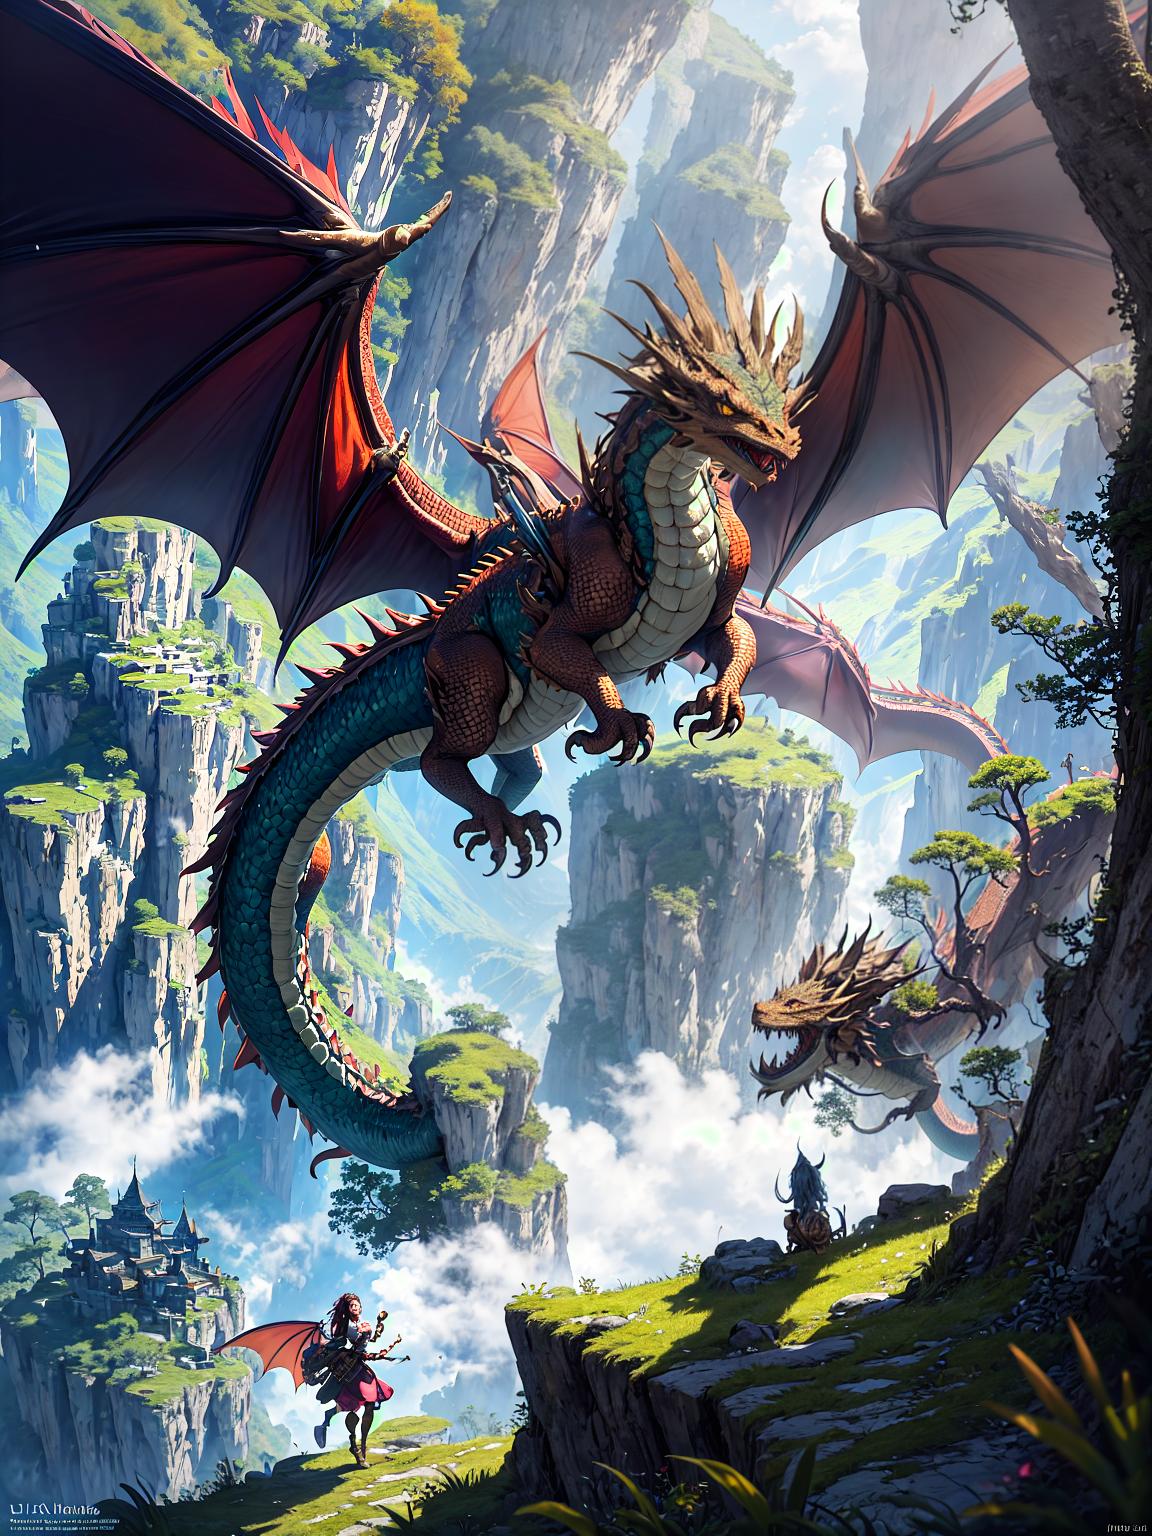  master piece, best quality, ultra detailed, highres, 4k.8k, Female adventurer., Riding a dragon, exploring, carrying a sword., Fearless and determined., BREAK Adventure with a dragon., Lush green mountainside., Ancient ruins, a treasure chest, a map, a compass., BREAK Mysterious and adventurous., Sunlight filtering through the trees, misty air, glowing dragon eyes, majestic wings.,